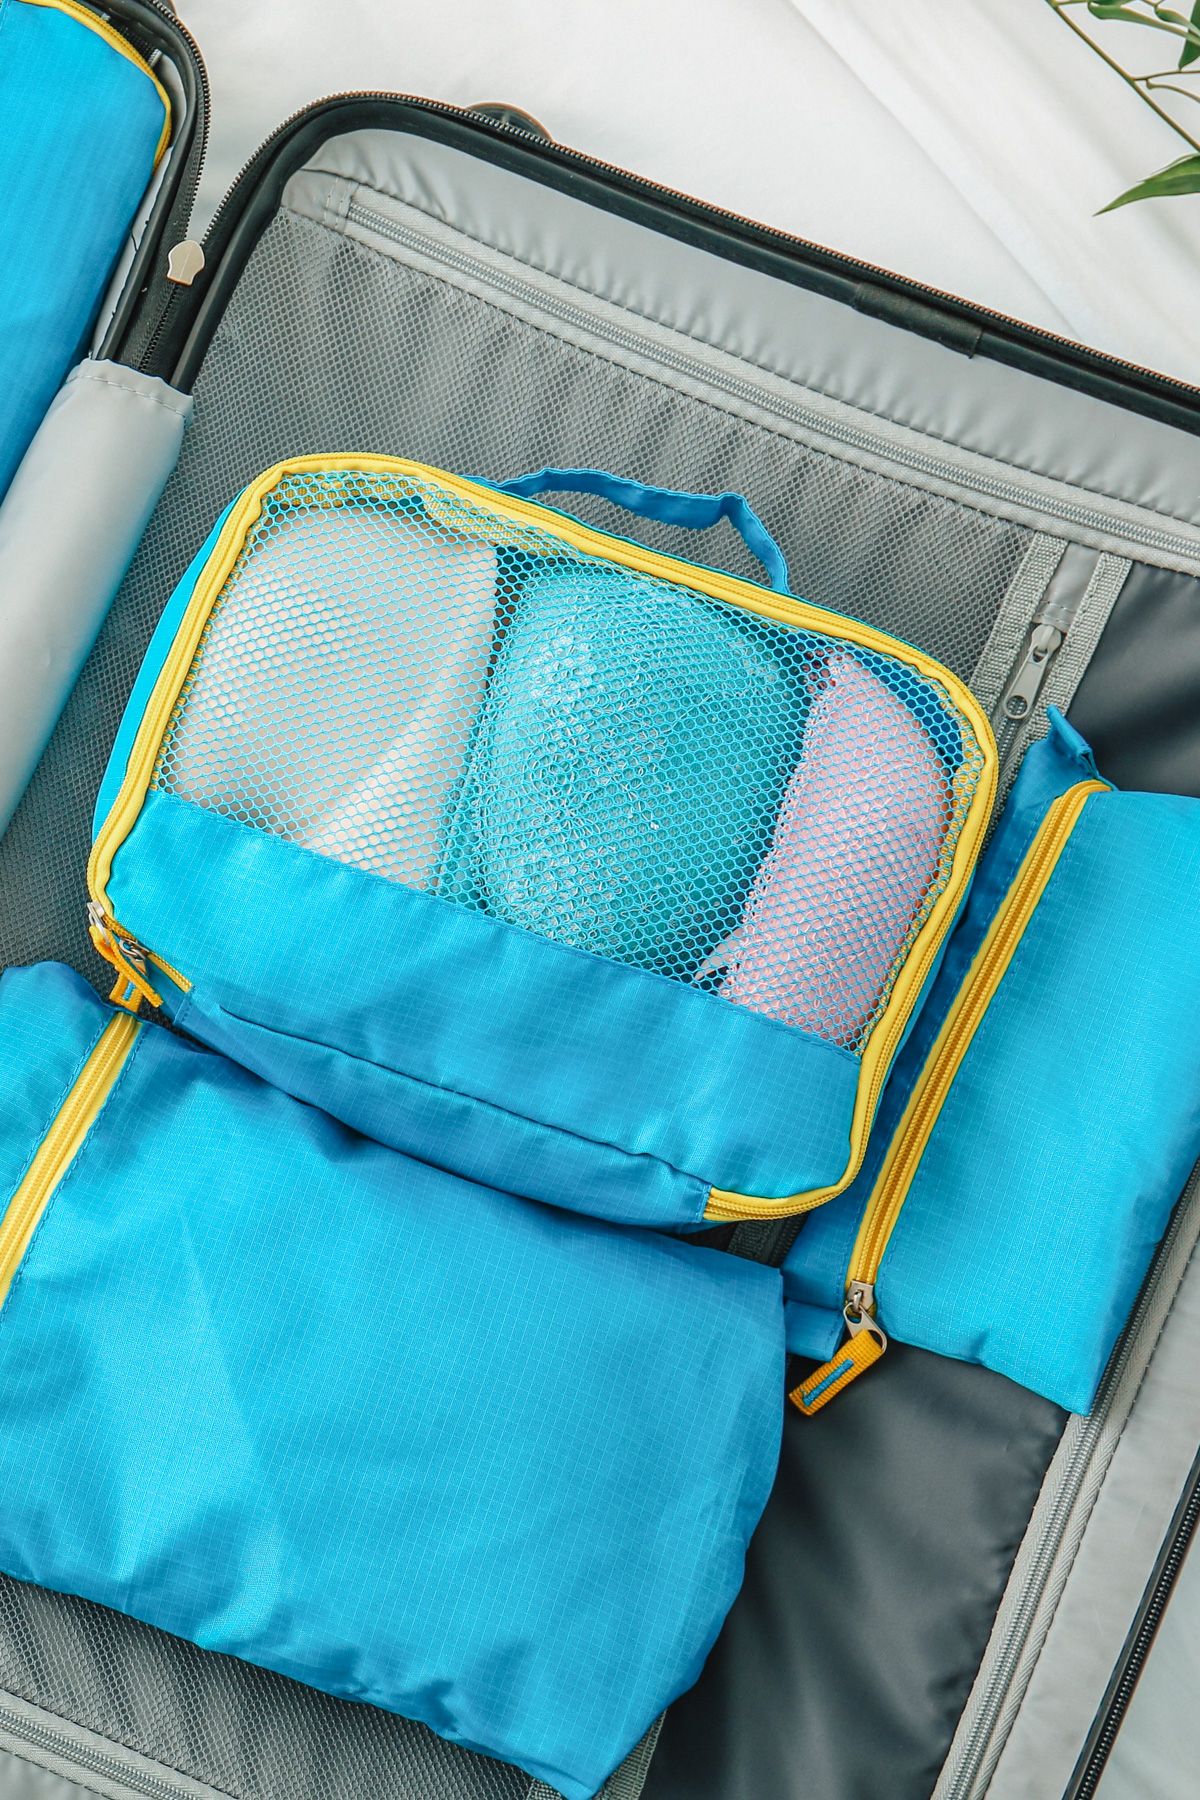 A close-up view of a set of three blue packing cubes with a mesh window, nestled inside of an open suitcase.